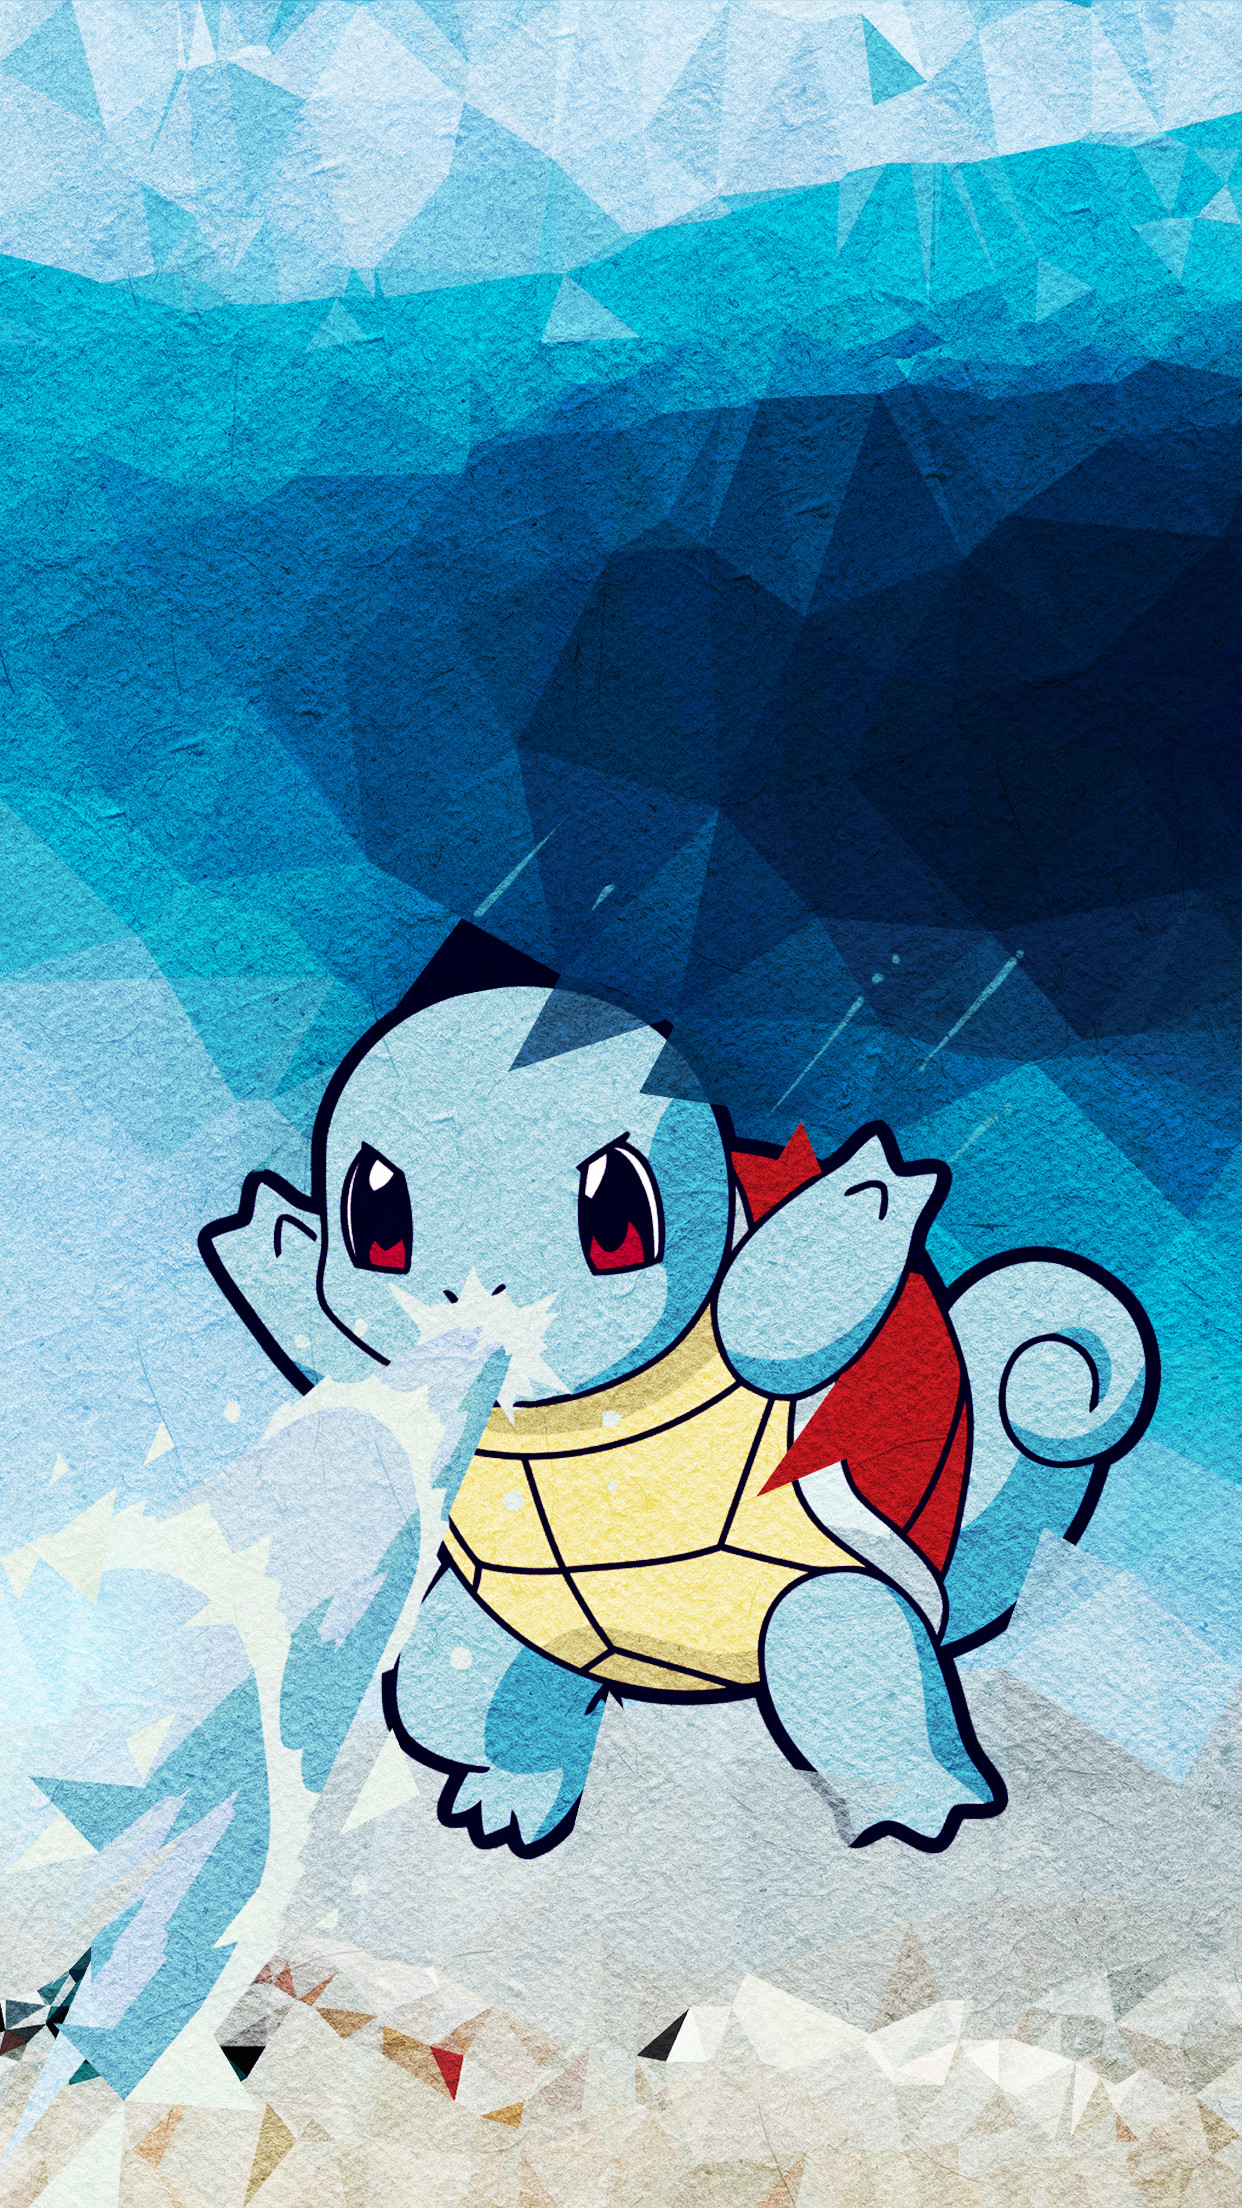 Pokémon Squirtle Wallpapers - Wallpaper Cave.